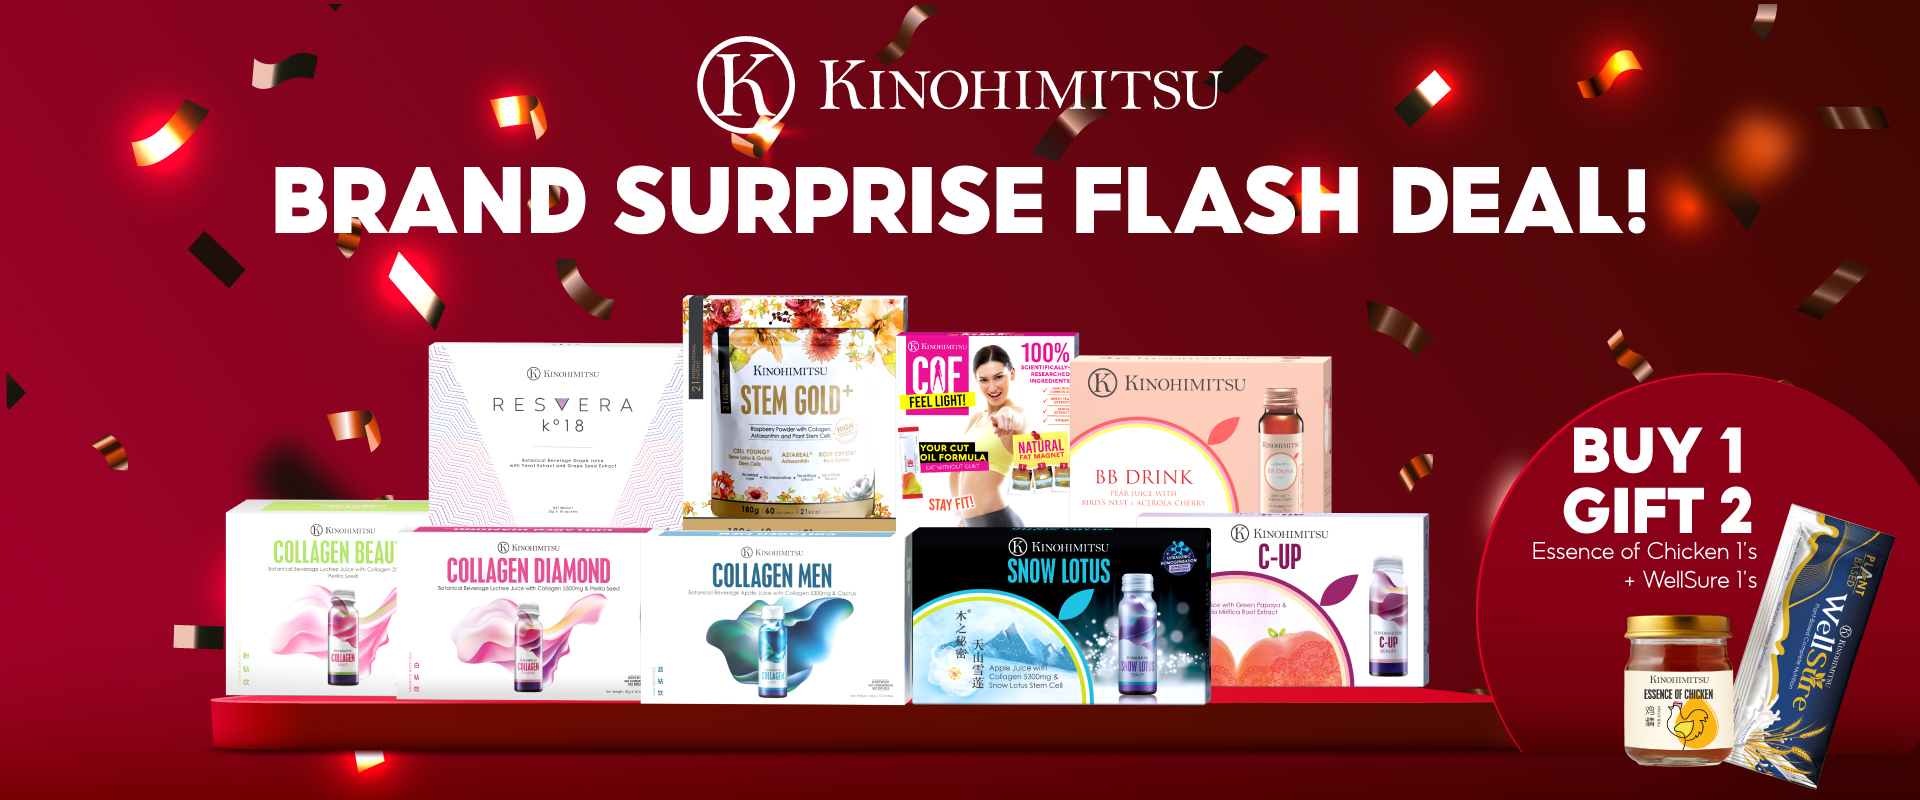 [BRAND SURPRISE FLASH DEAL] - BUY 1 GIFT 2 